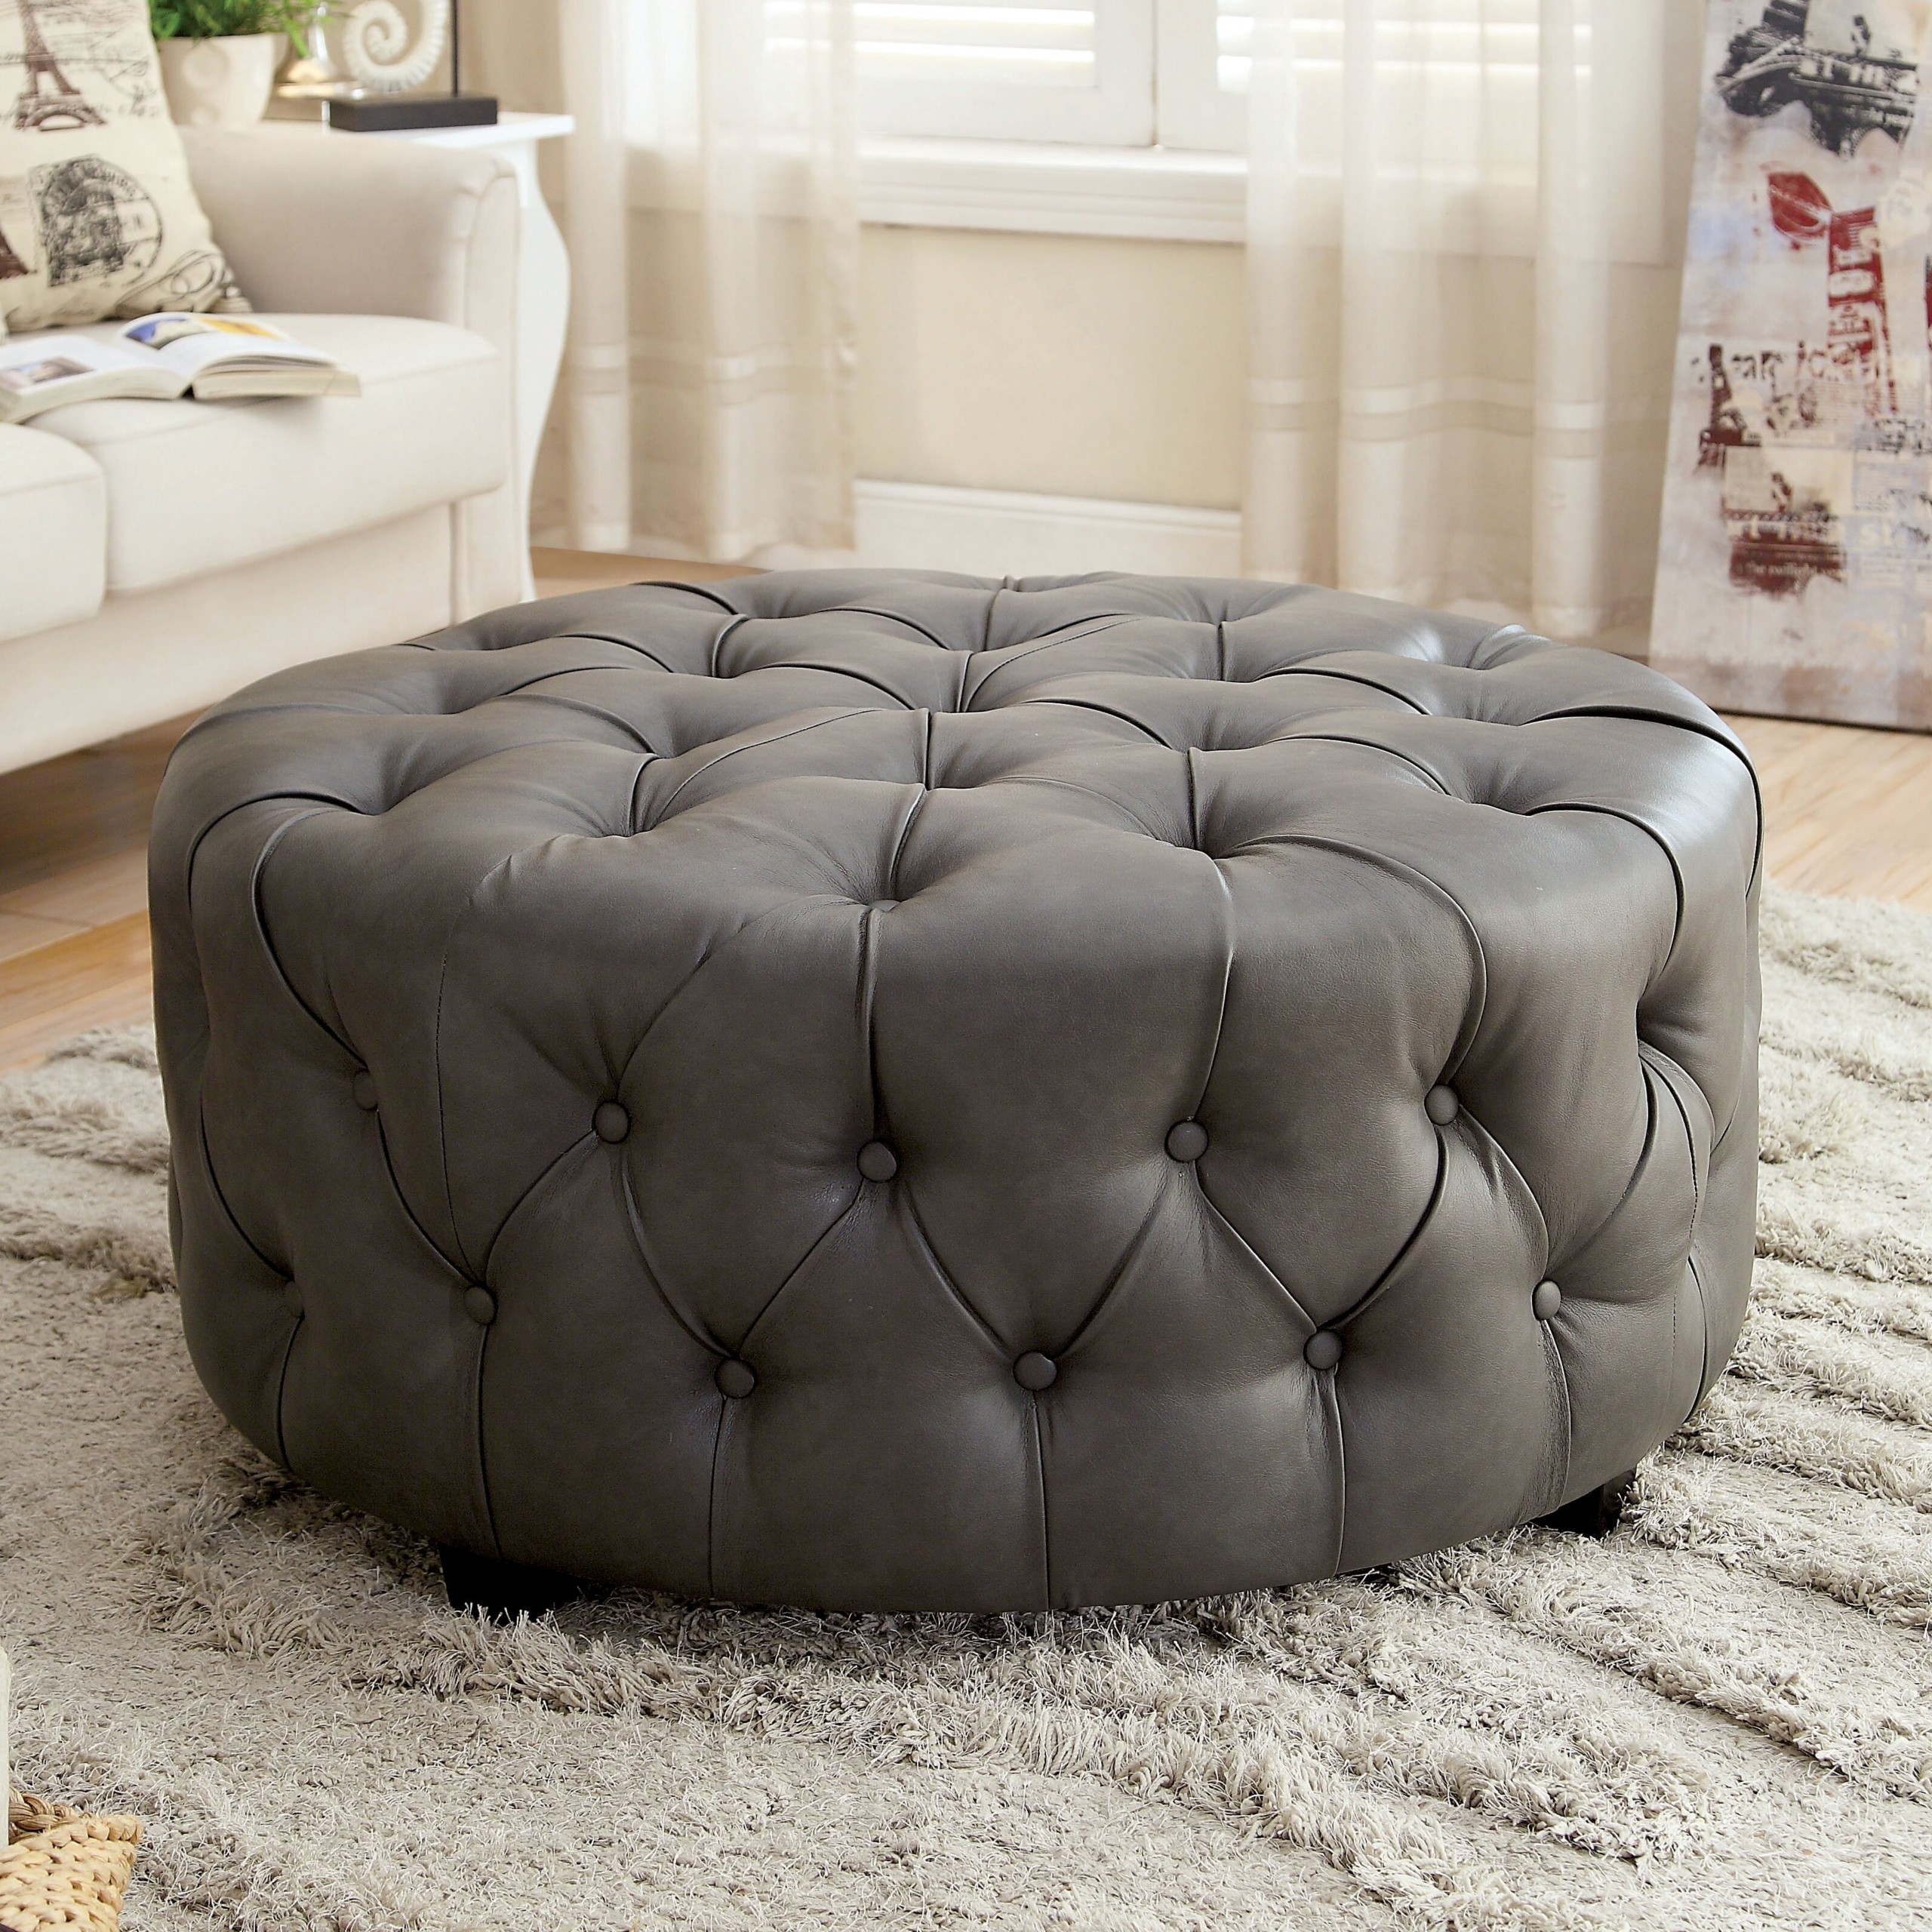 House of hampton bowie leather tufted round ottoman